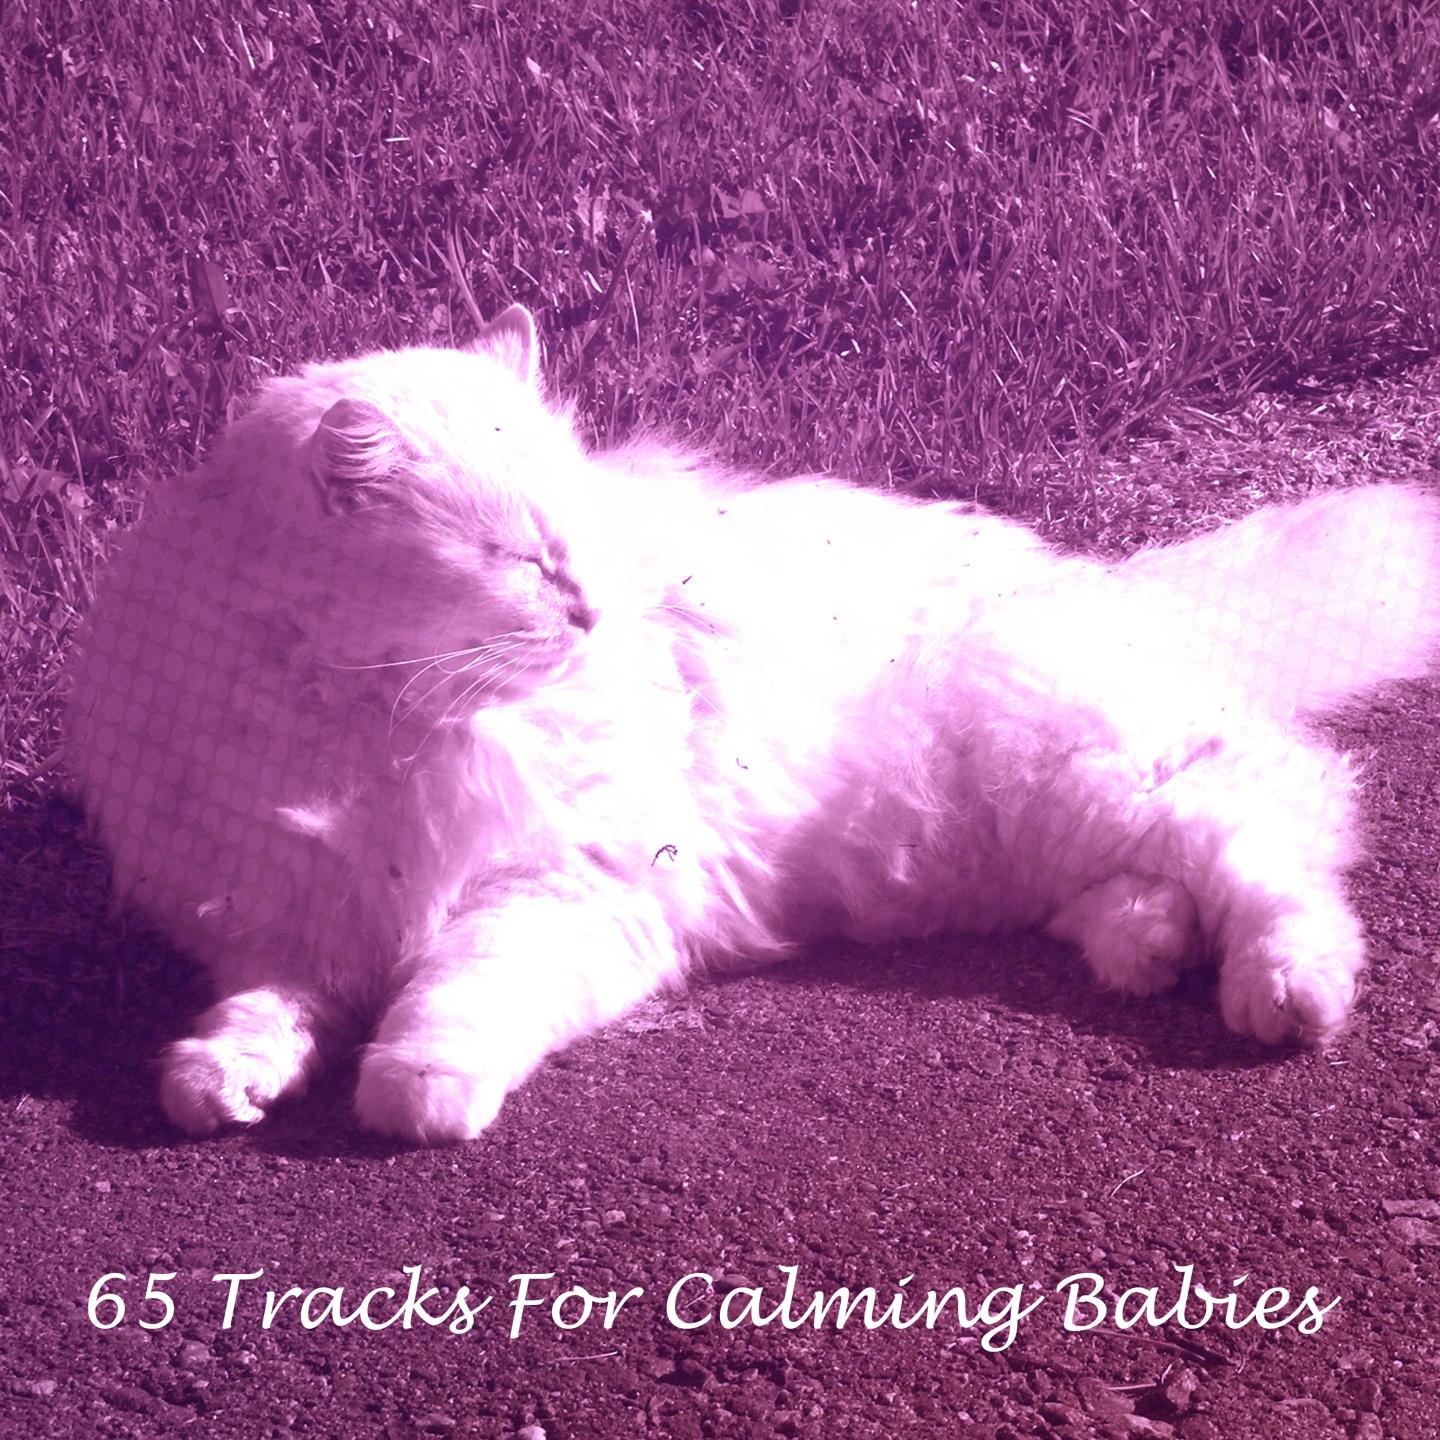 65 Tracks For Calming Babies